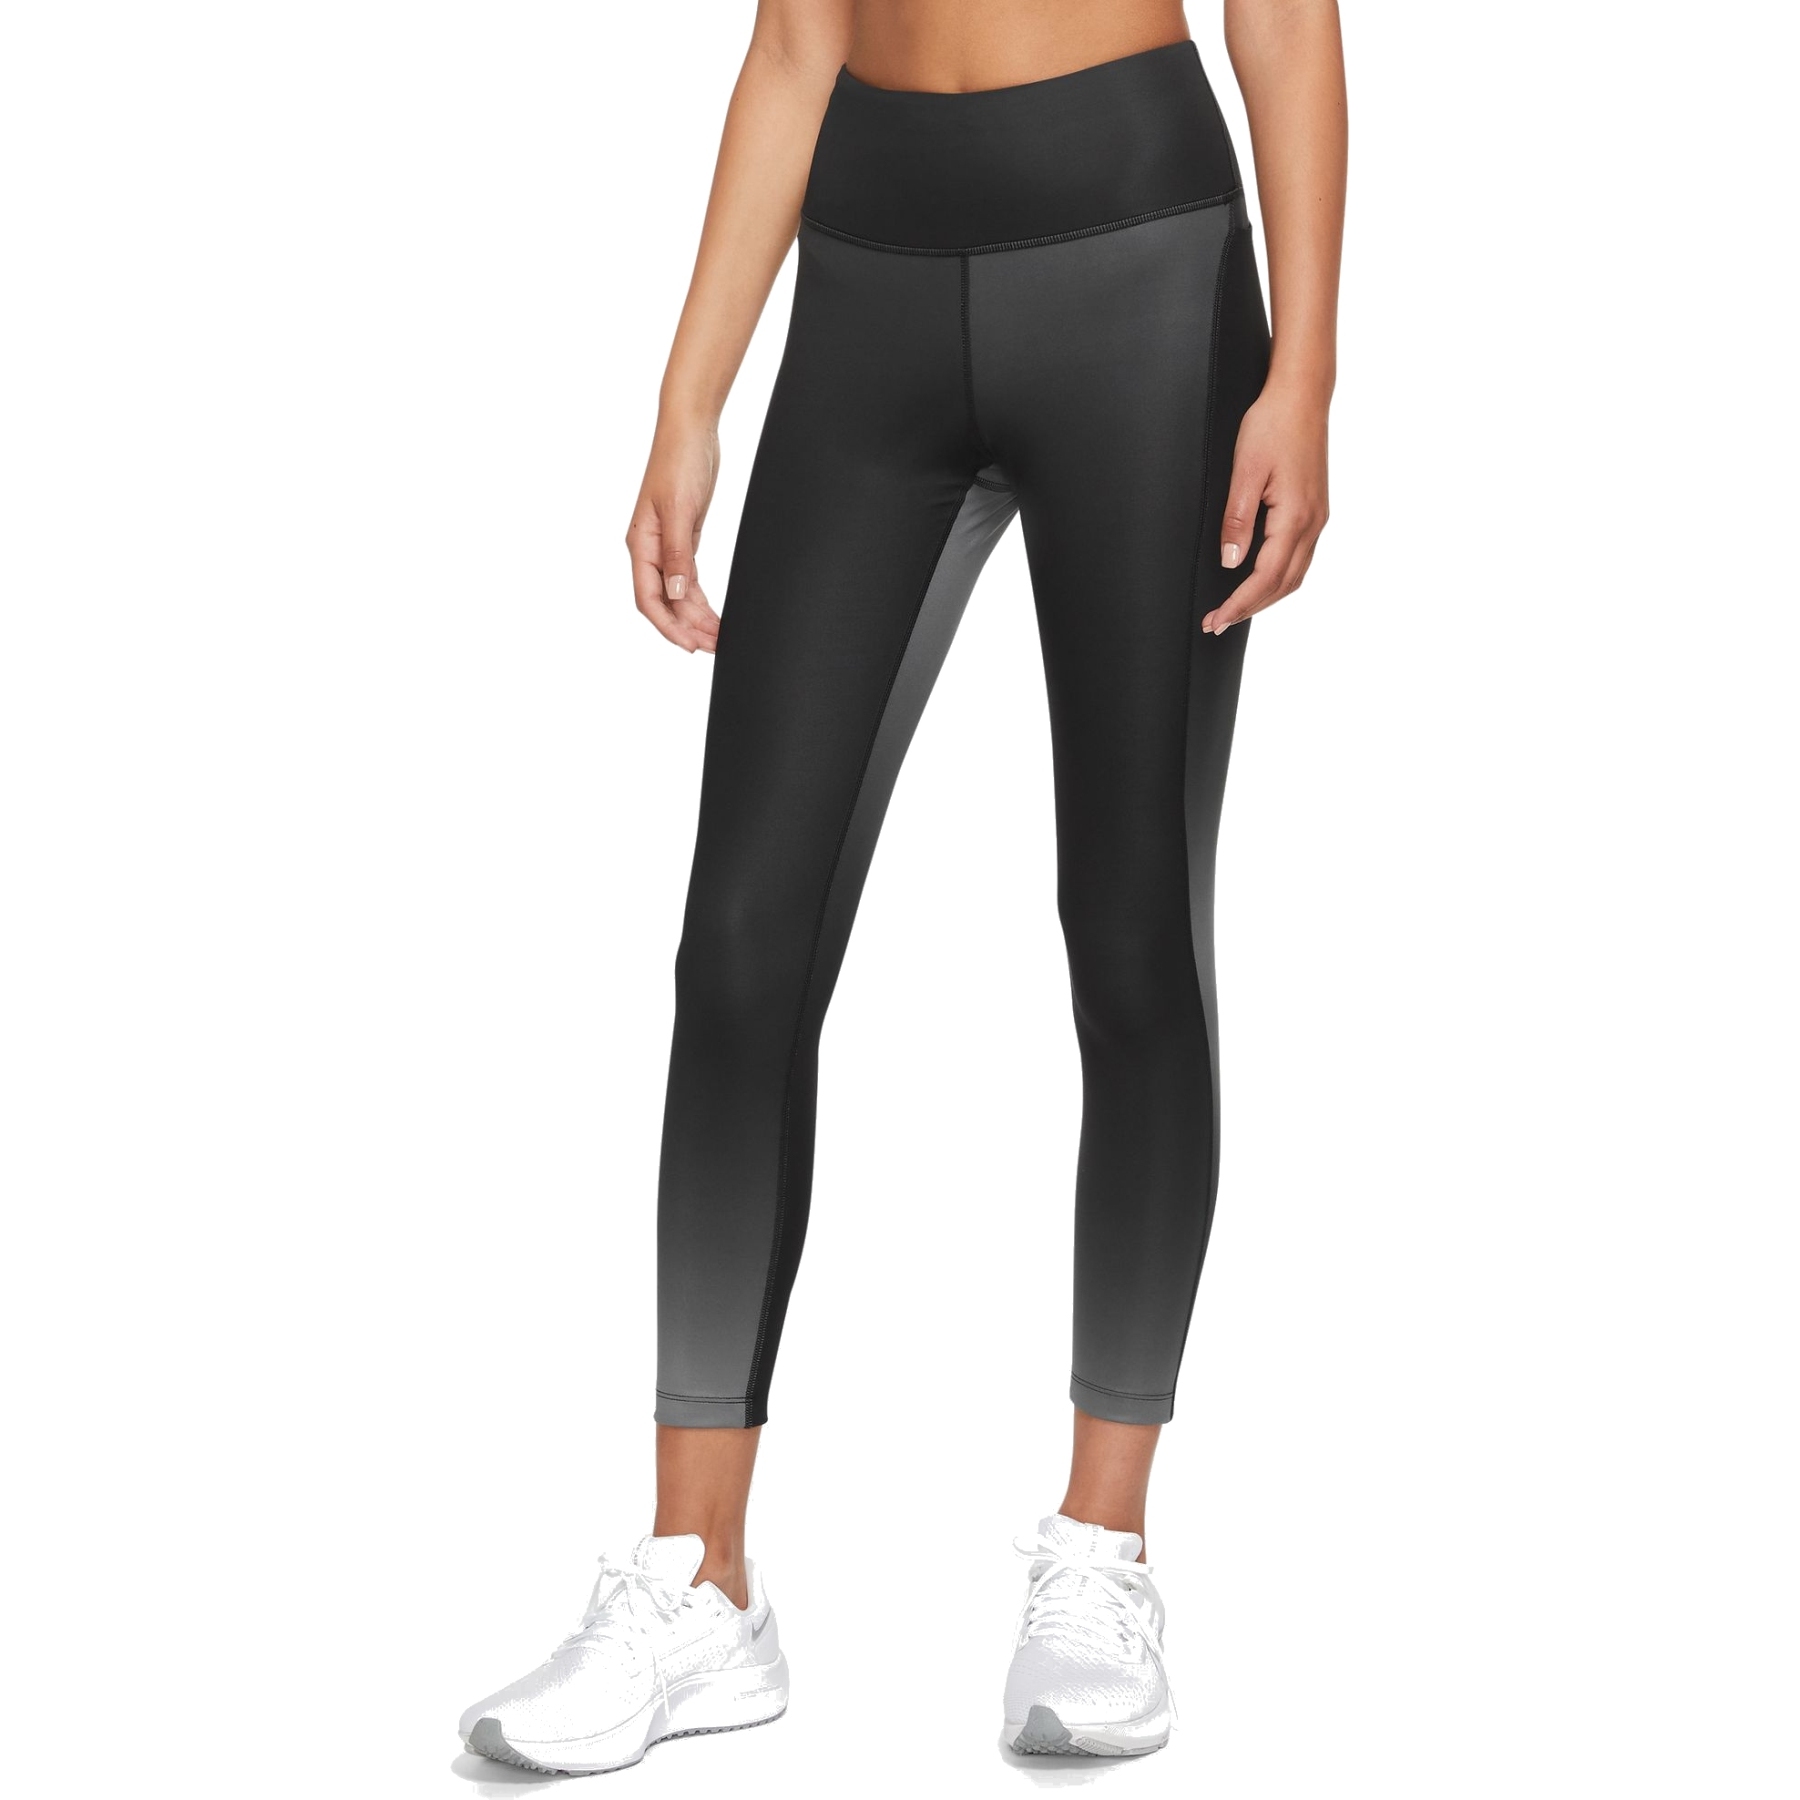 Picture of Nike Fast 7/8-Running Leggings Women - black/reflective silver DX0950-010